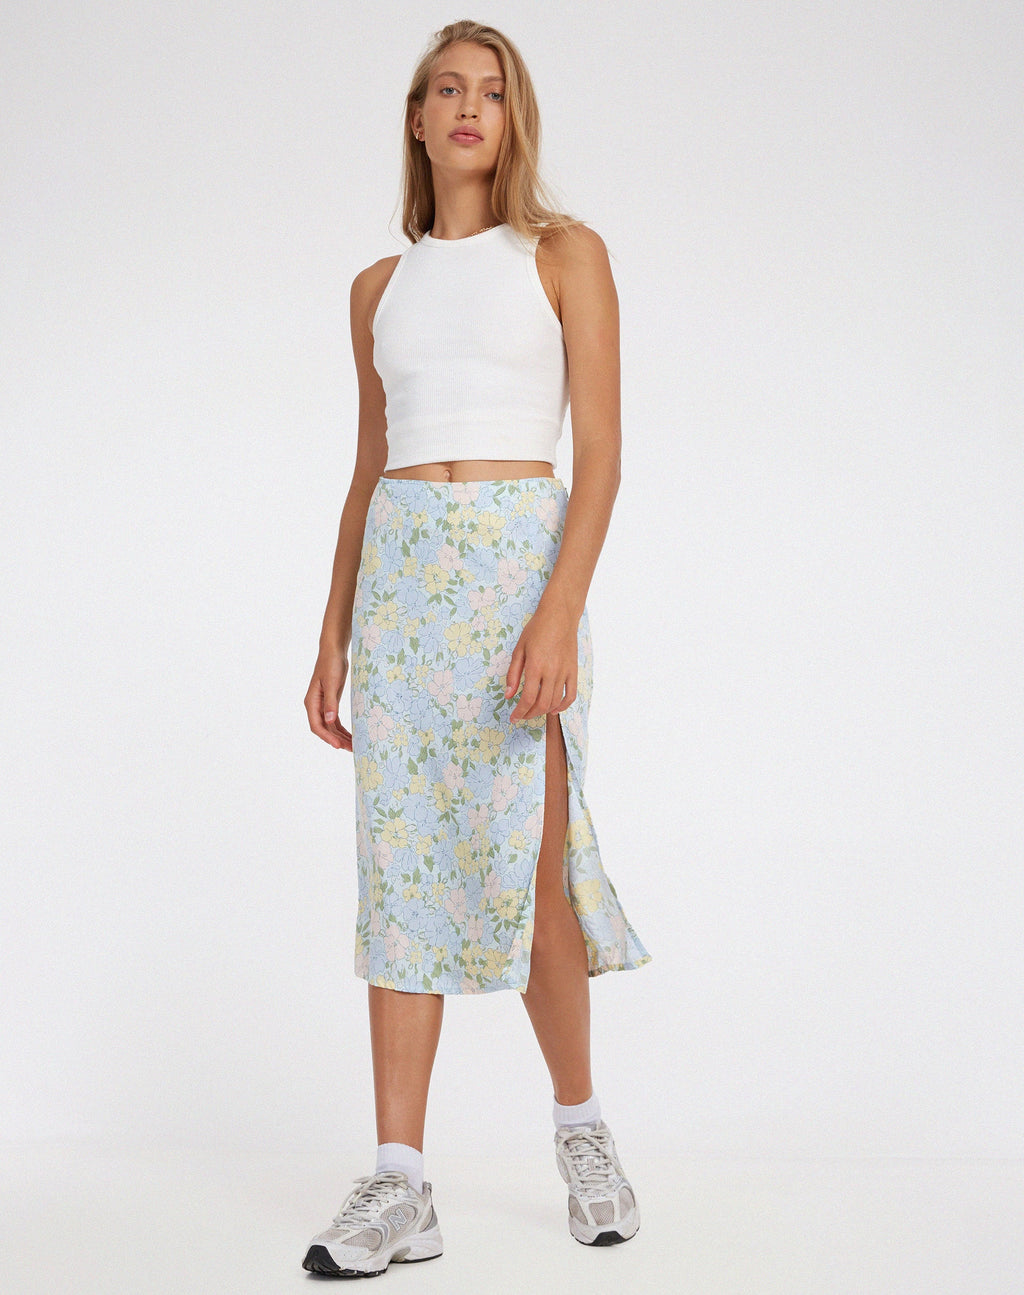 Seko Midi Skirt in Washed Out Pastel Floral